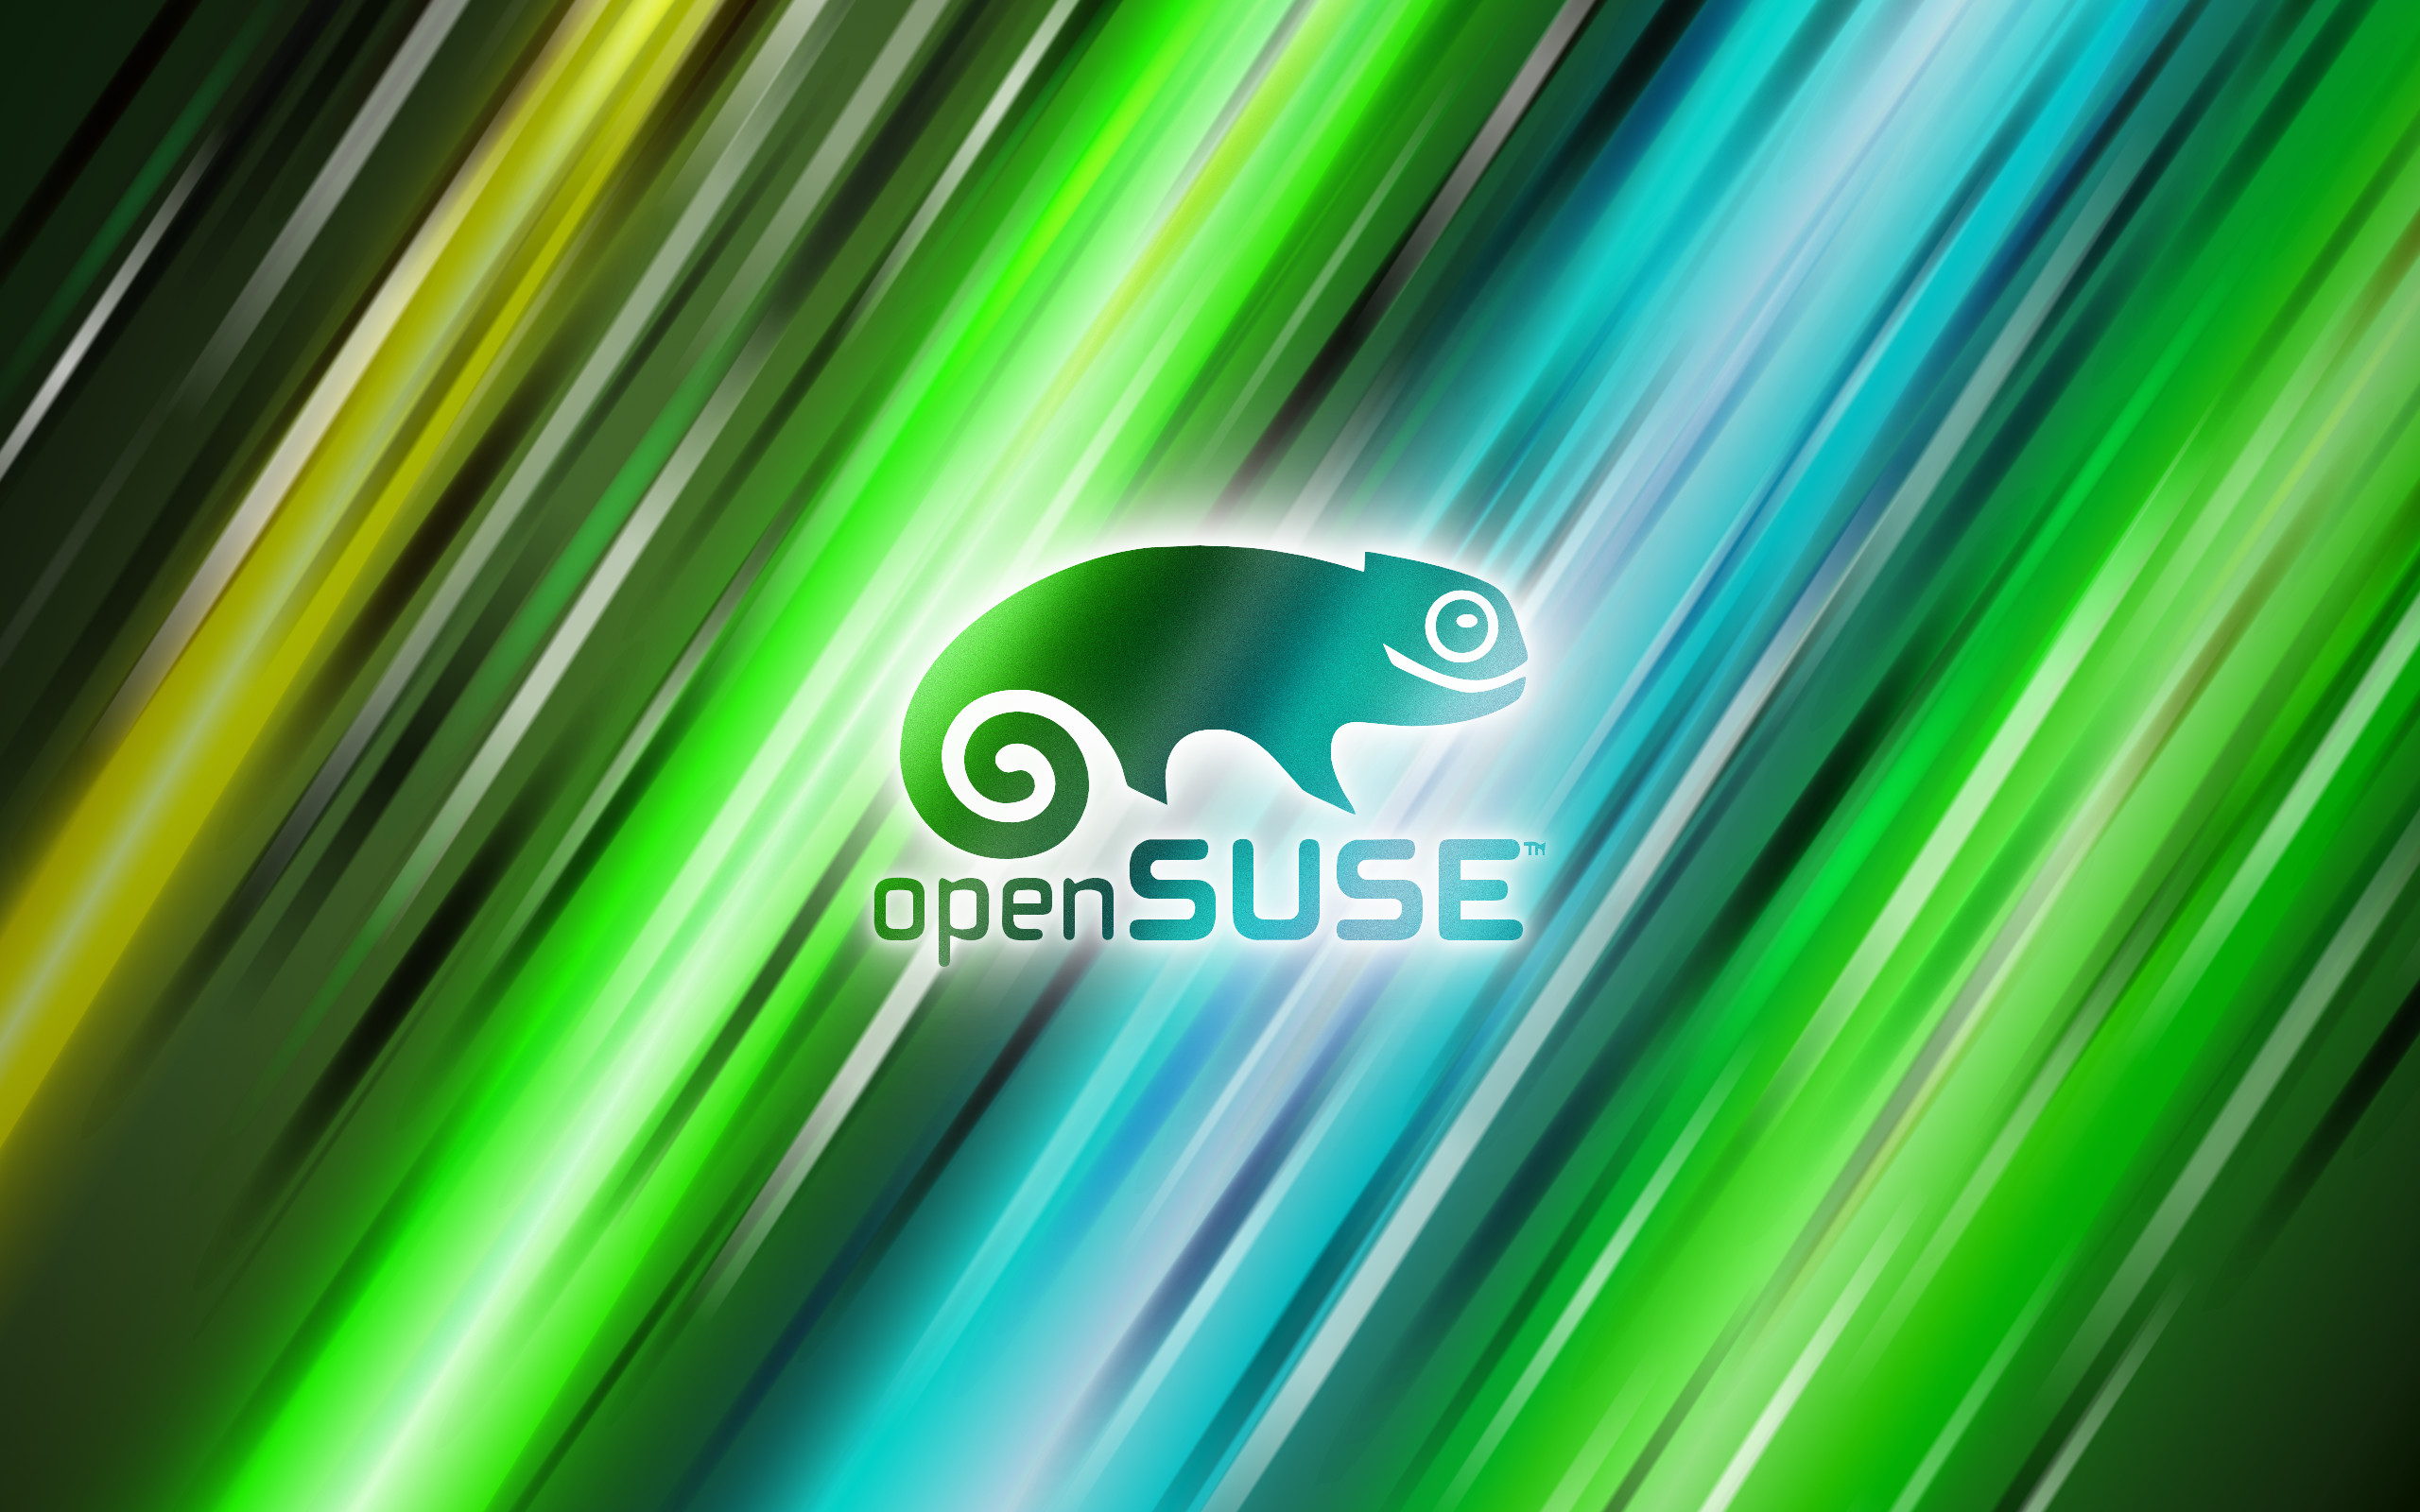 2560x1600 openSUSE Rays by sonicboom1226 openSUSE Rays by sonicboom1226